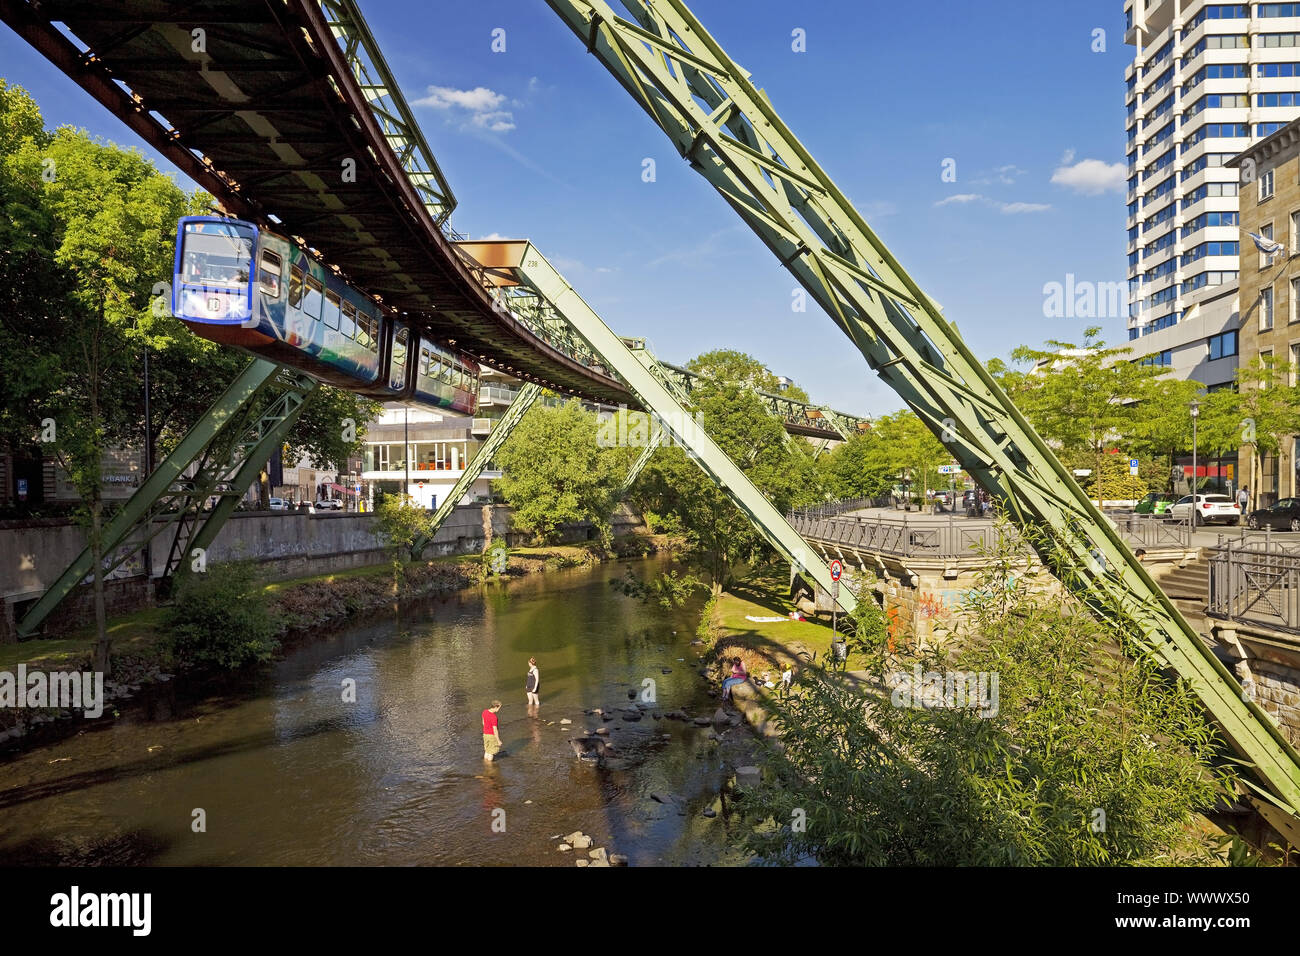 Wuppertal suspension railway over river Wupper in the city, Wuppertal, Germany, Europe Stock Photo